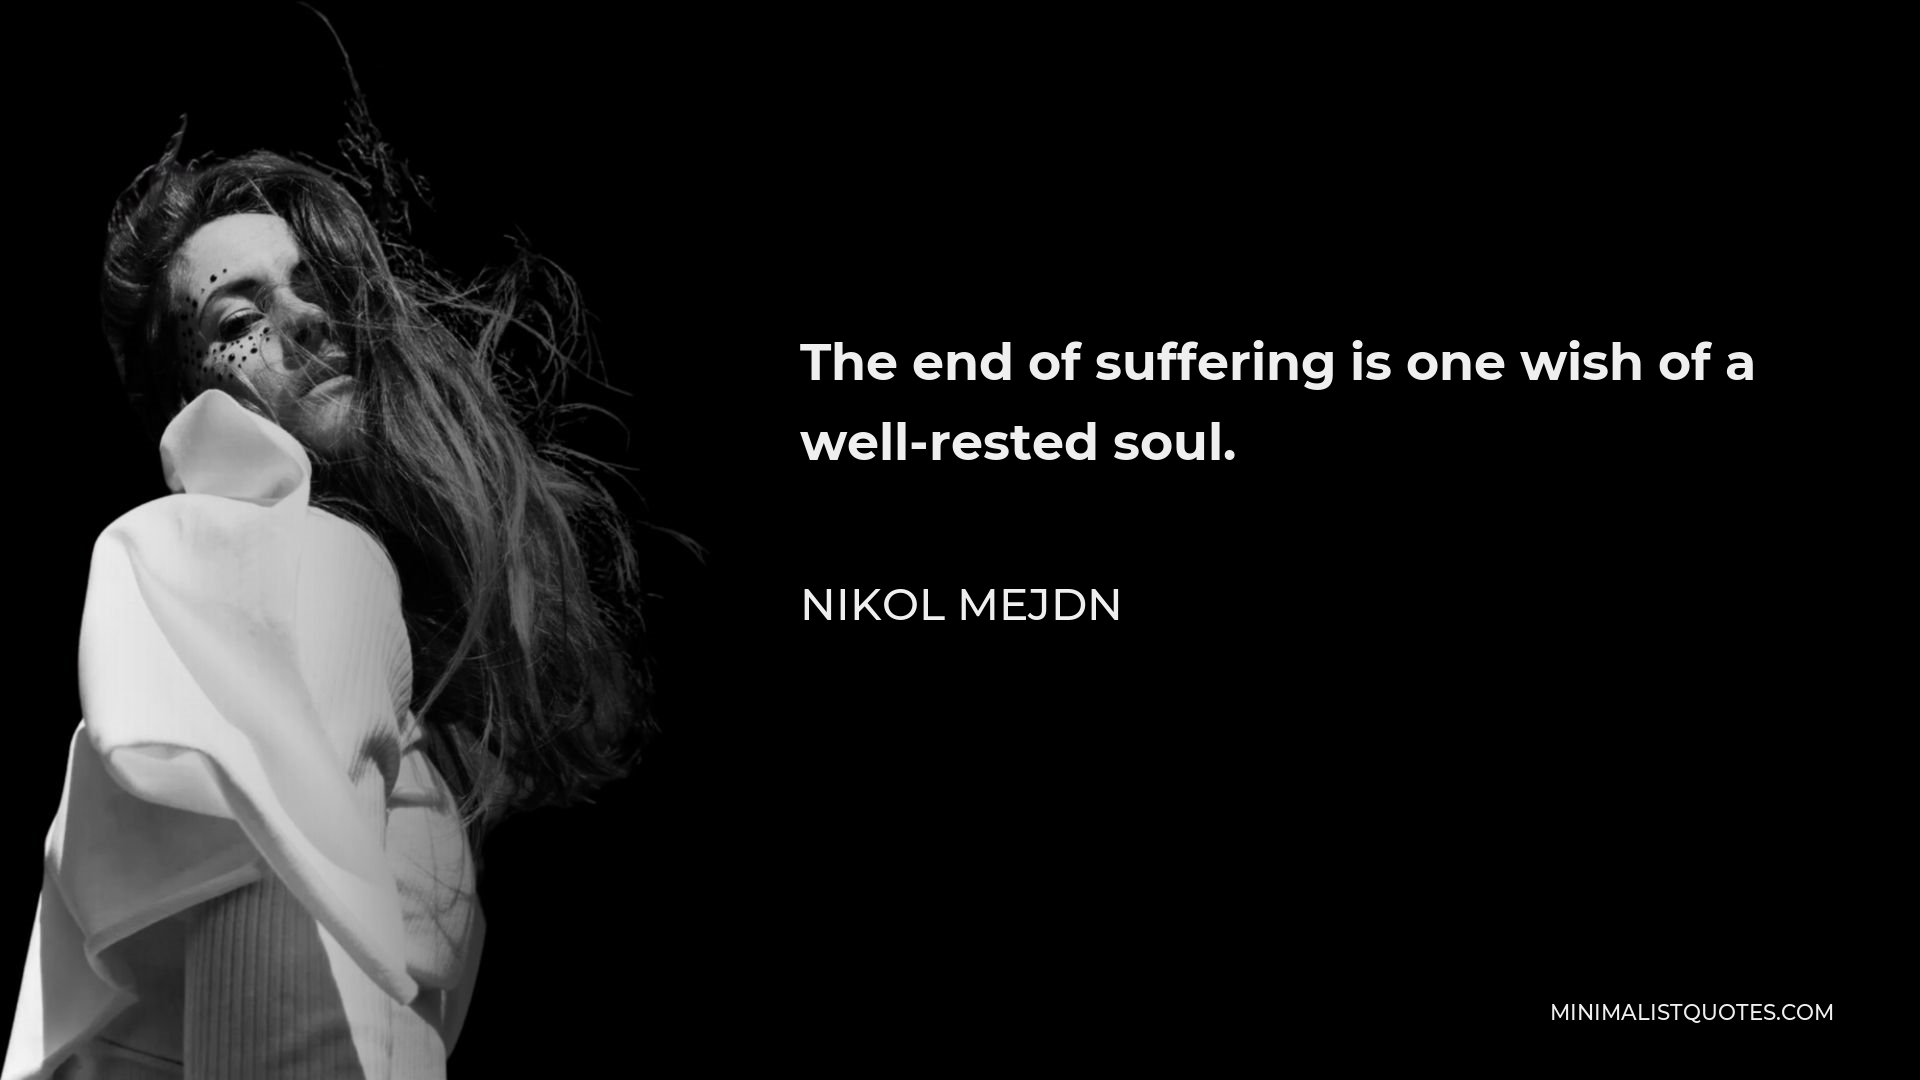 Nikol Mejdn Quote - The end of suffering is one wish of a well-rested soul.